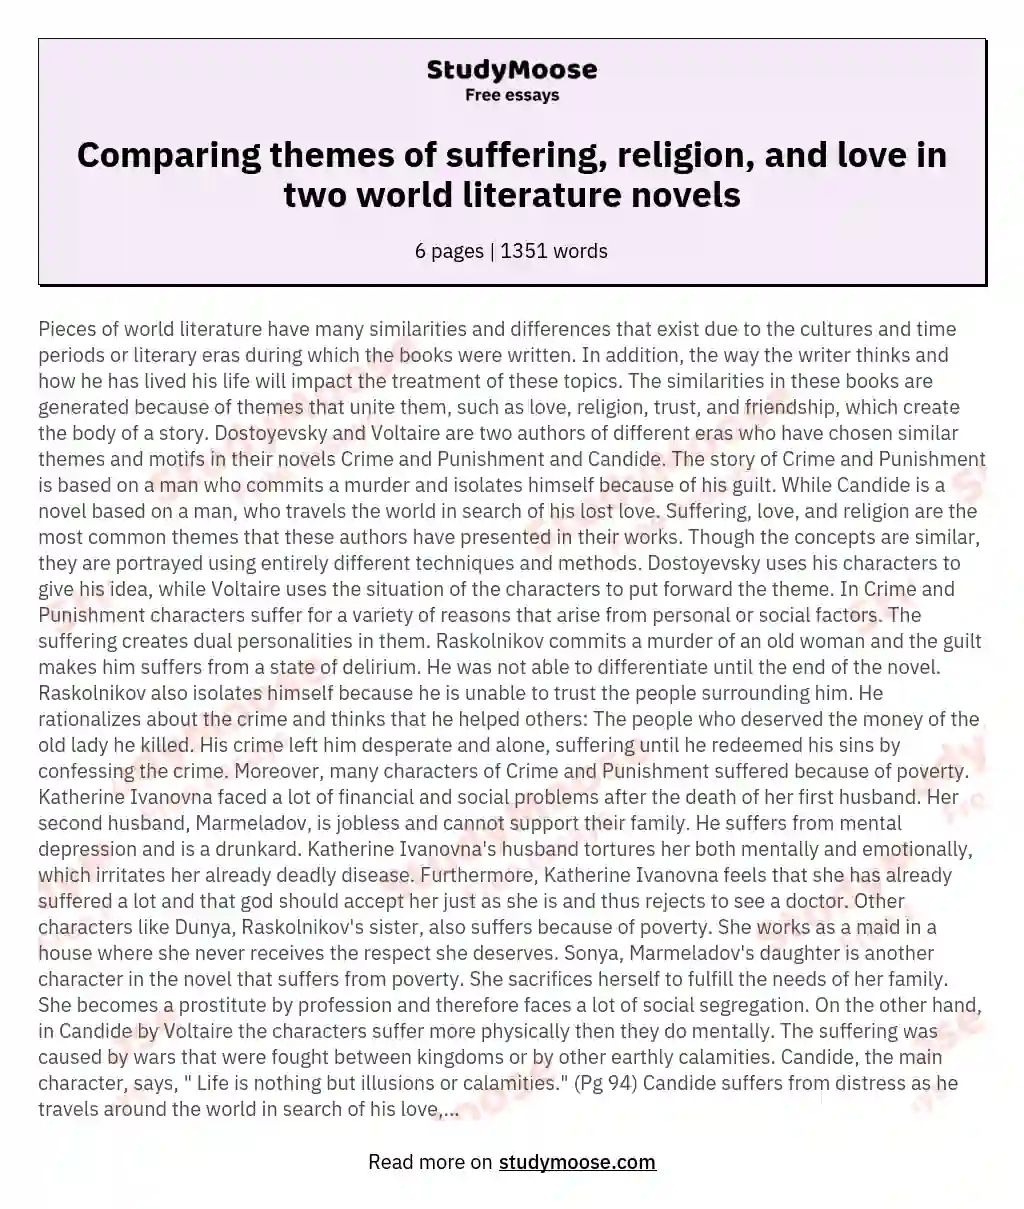 Analysis of themes like suffering, religion and love in two different world literature novels